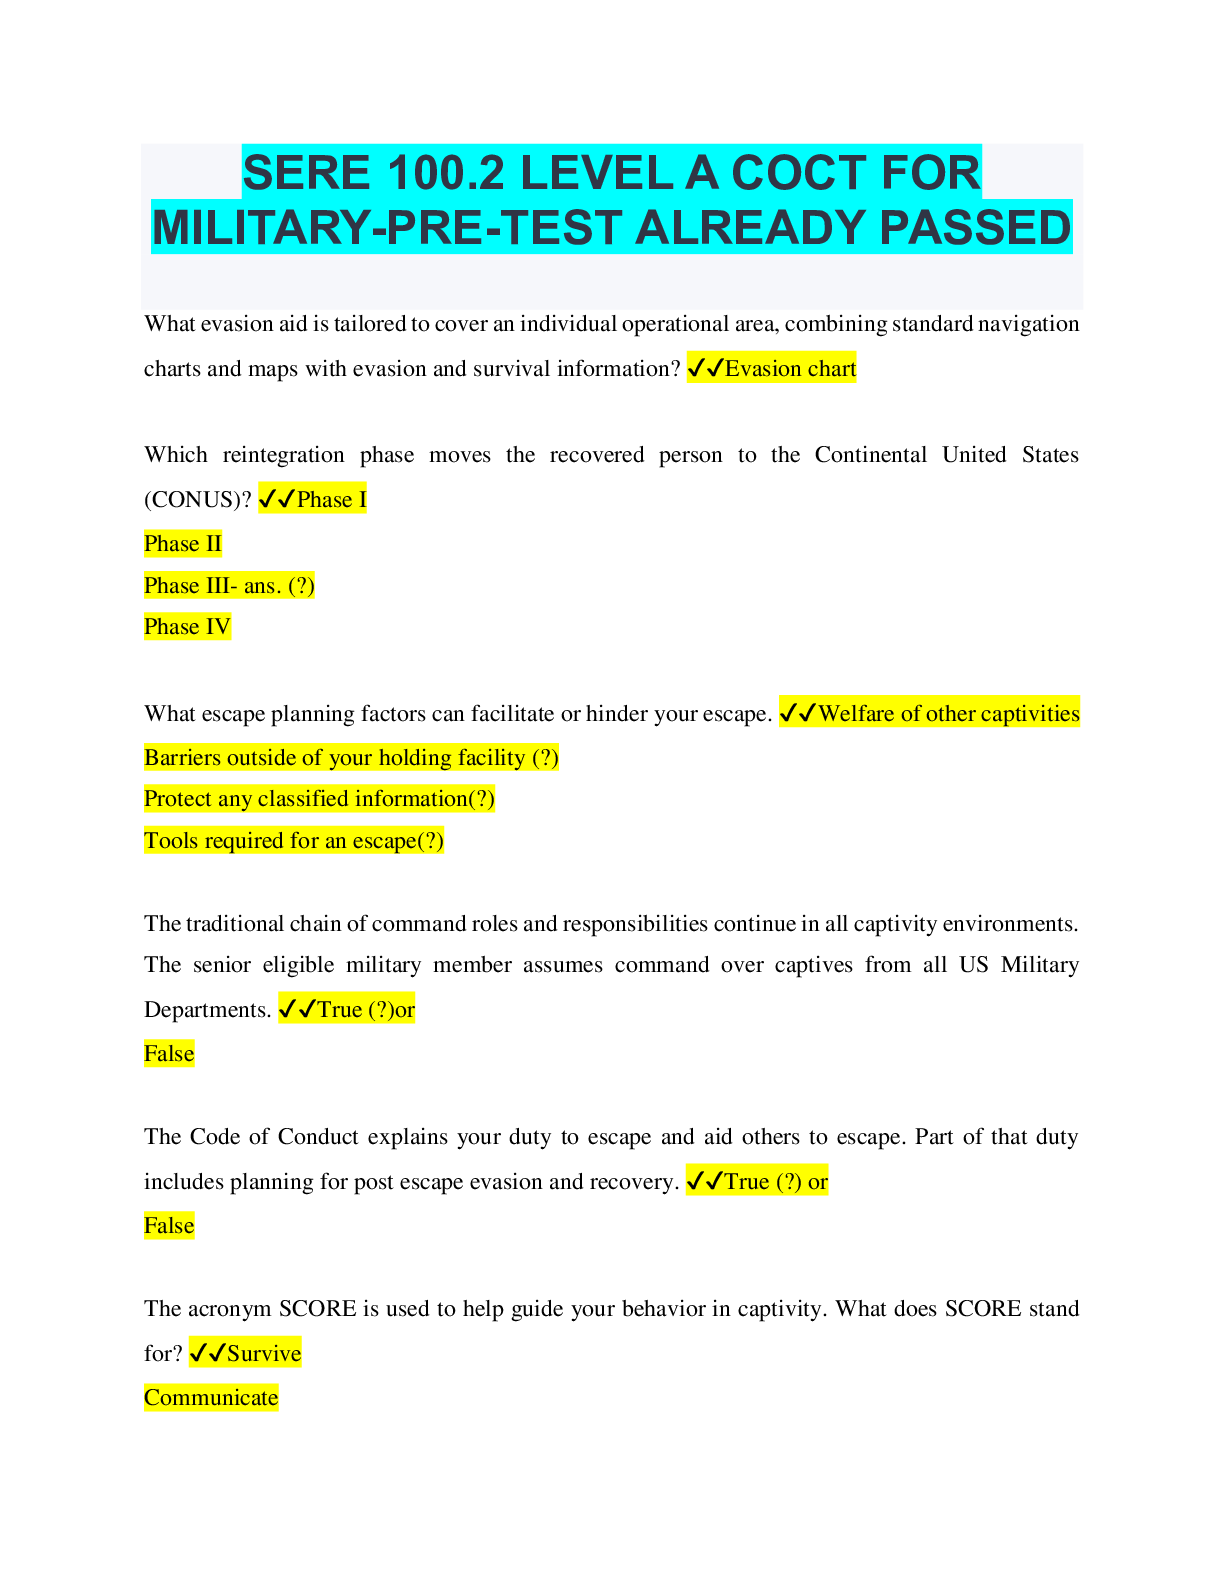 SERE 100.2 LEVEL A COCT FOR MILITARYPRETEST ALREADY PASSED